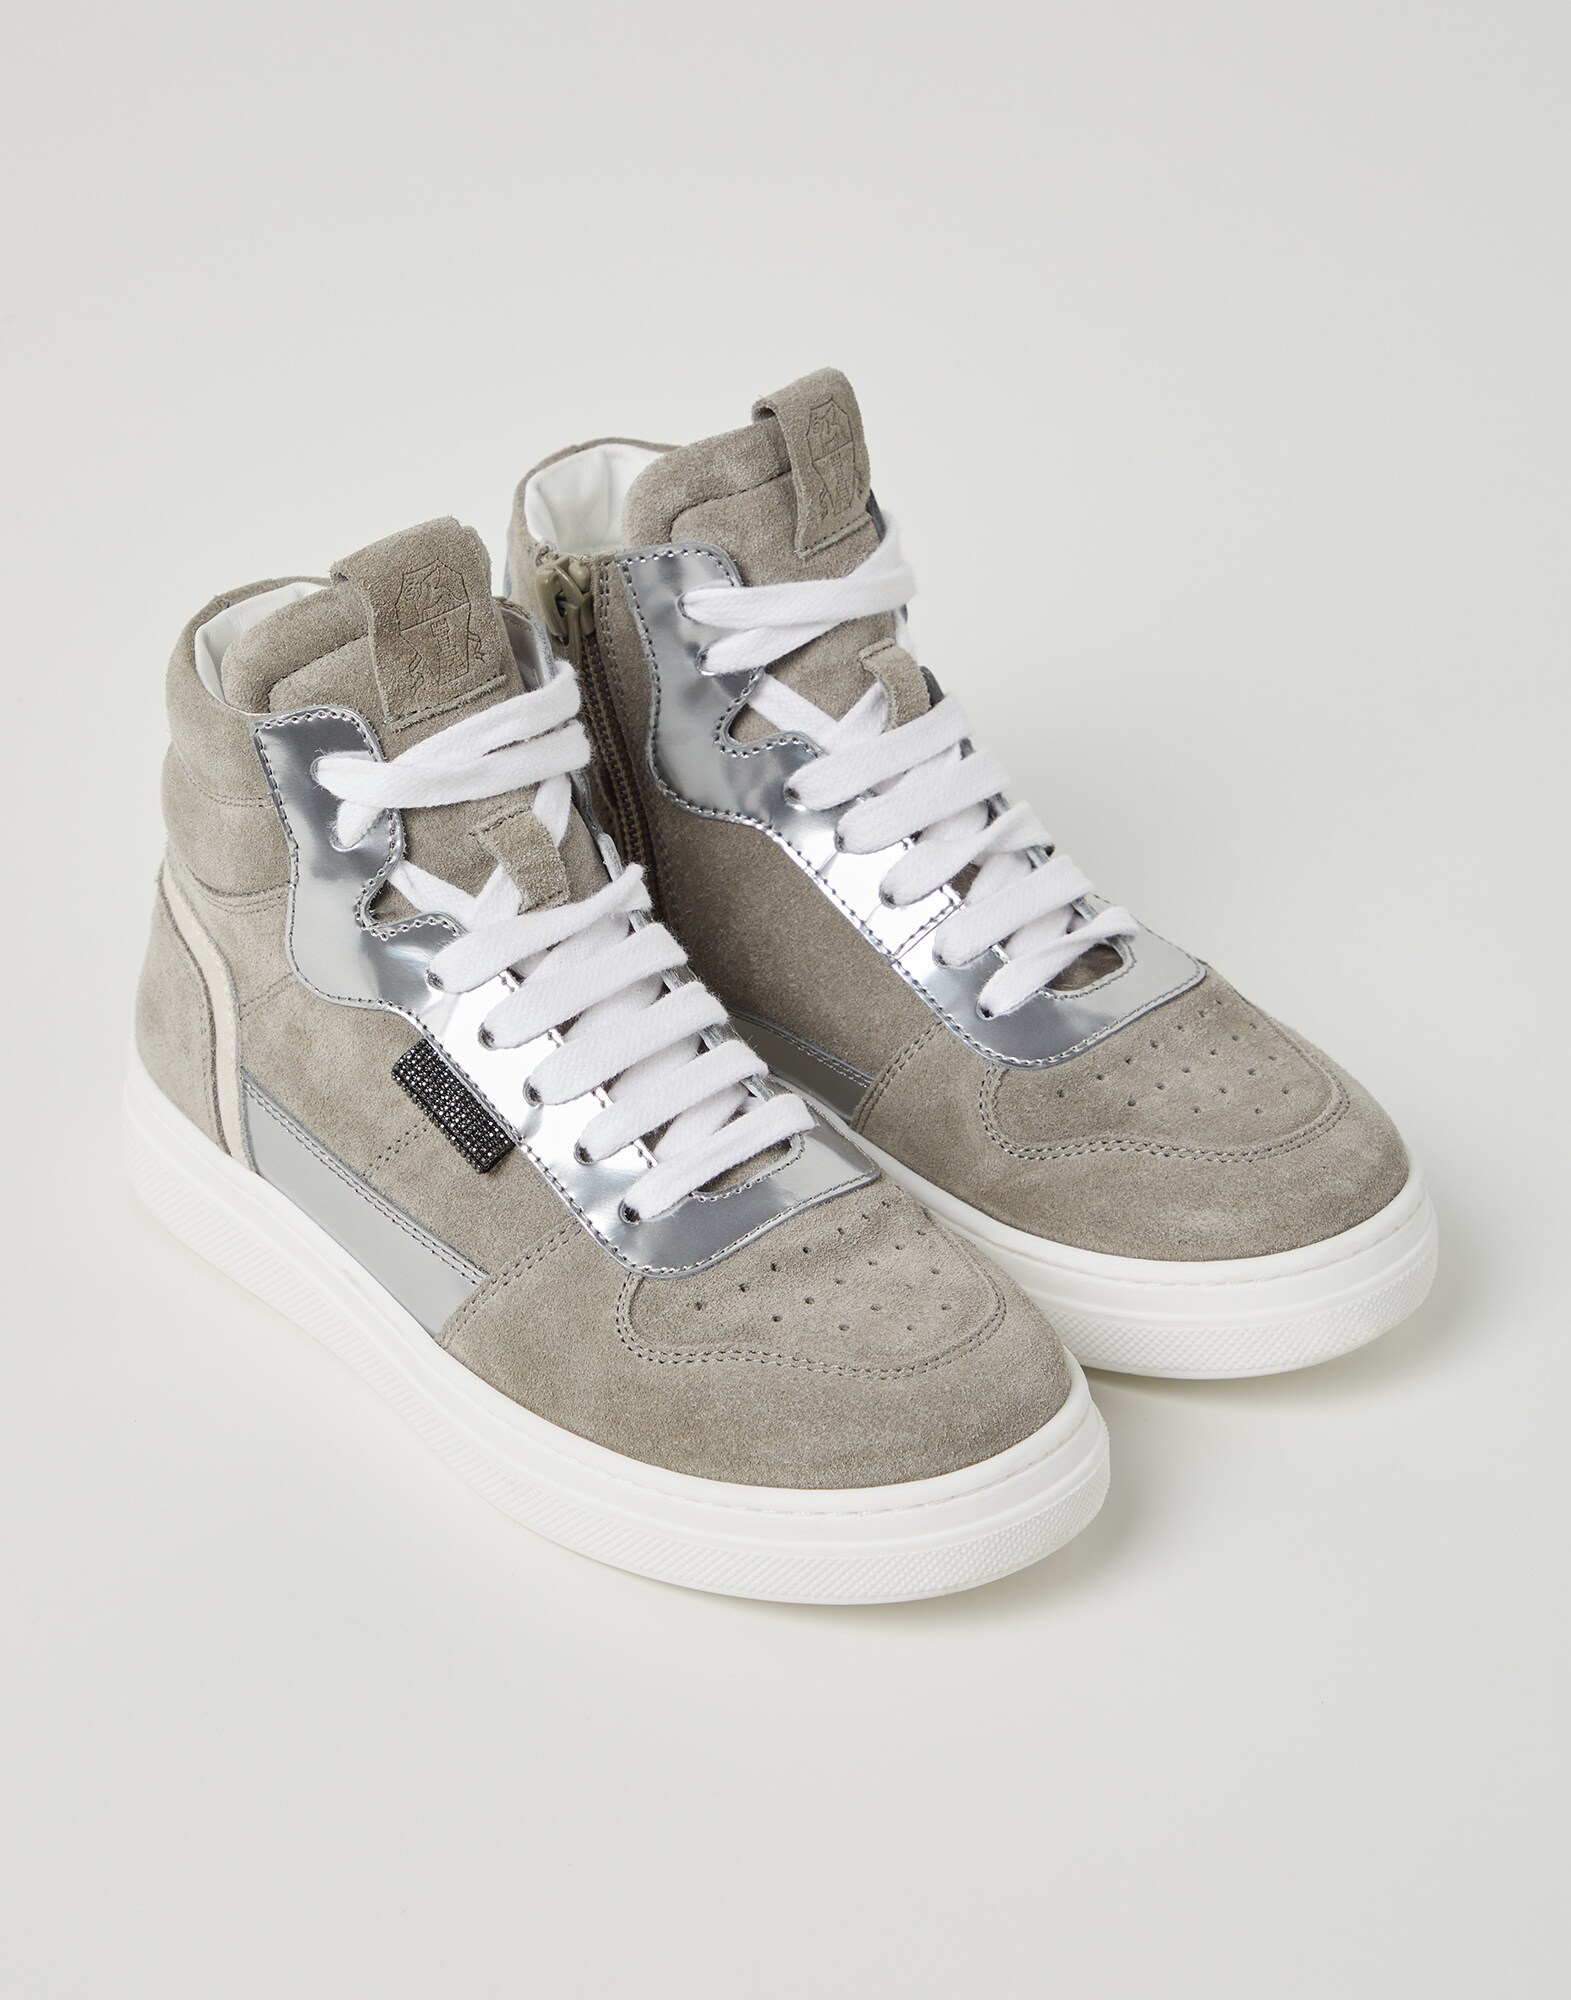 Suede and calfskin sneakers